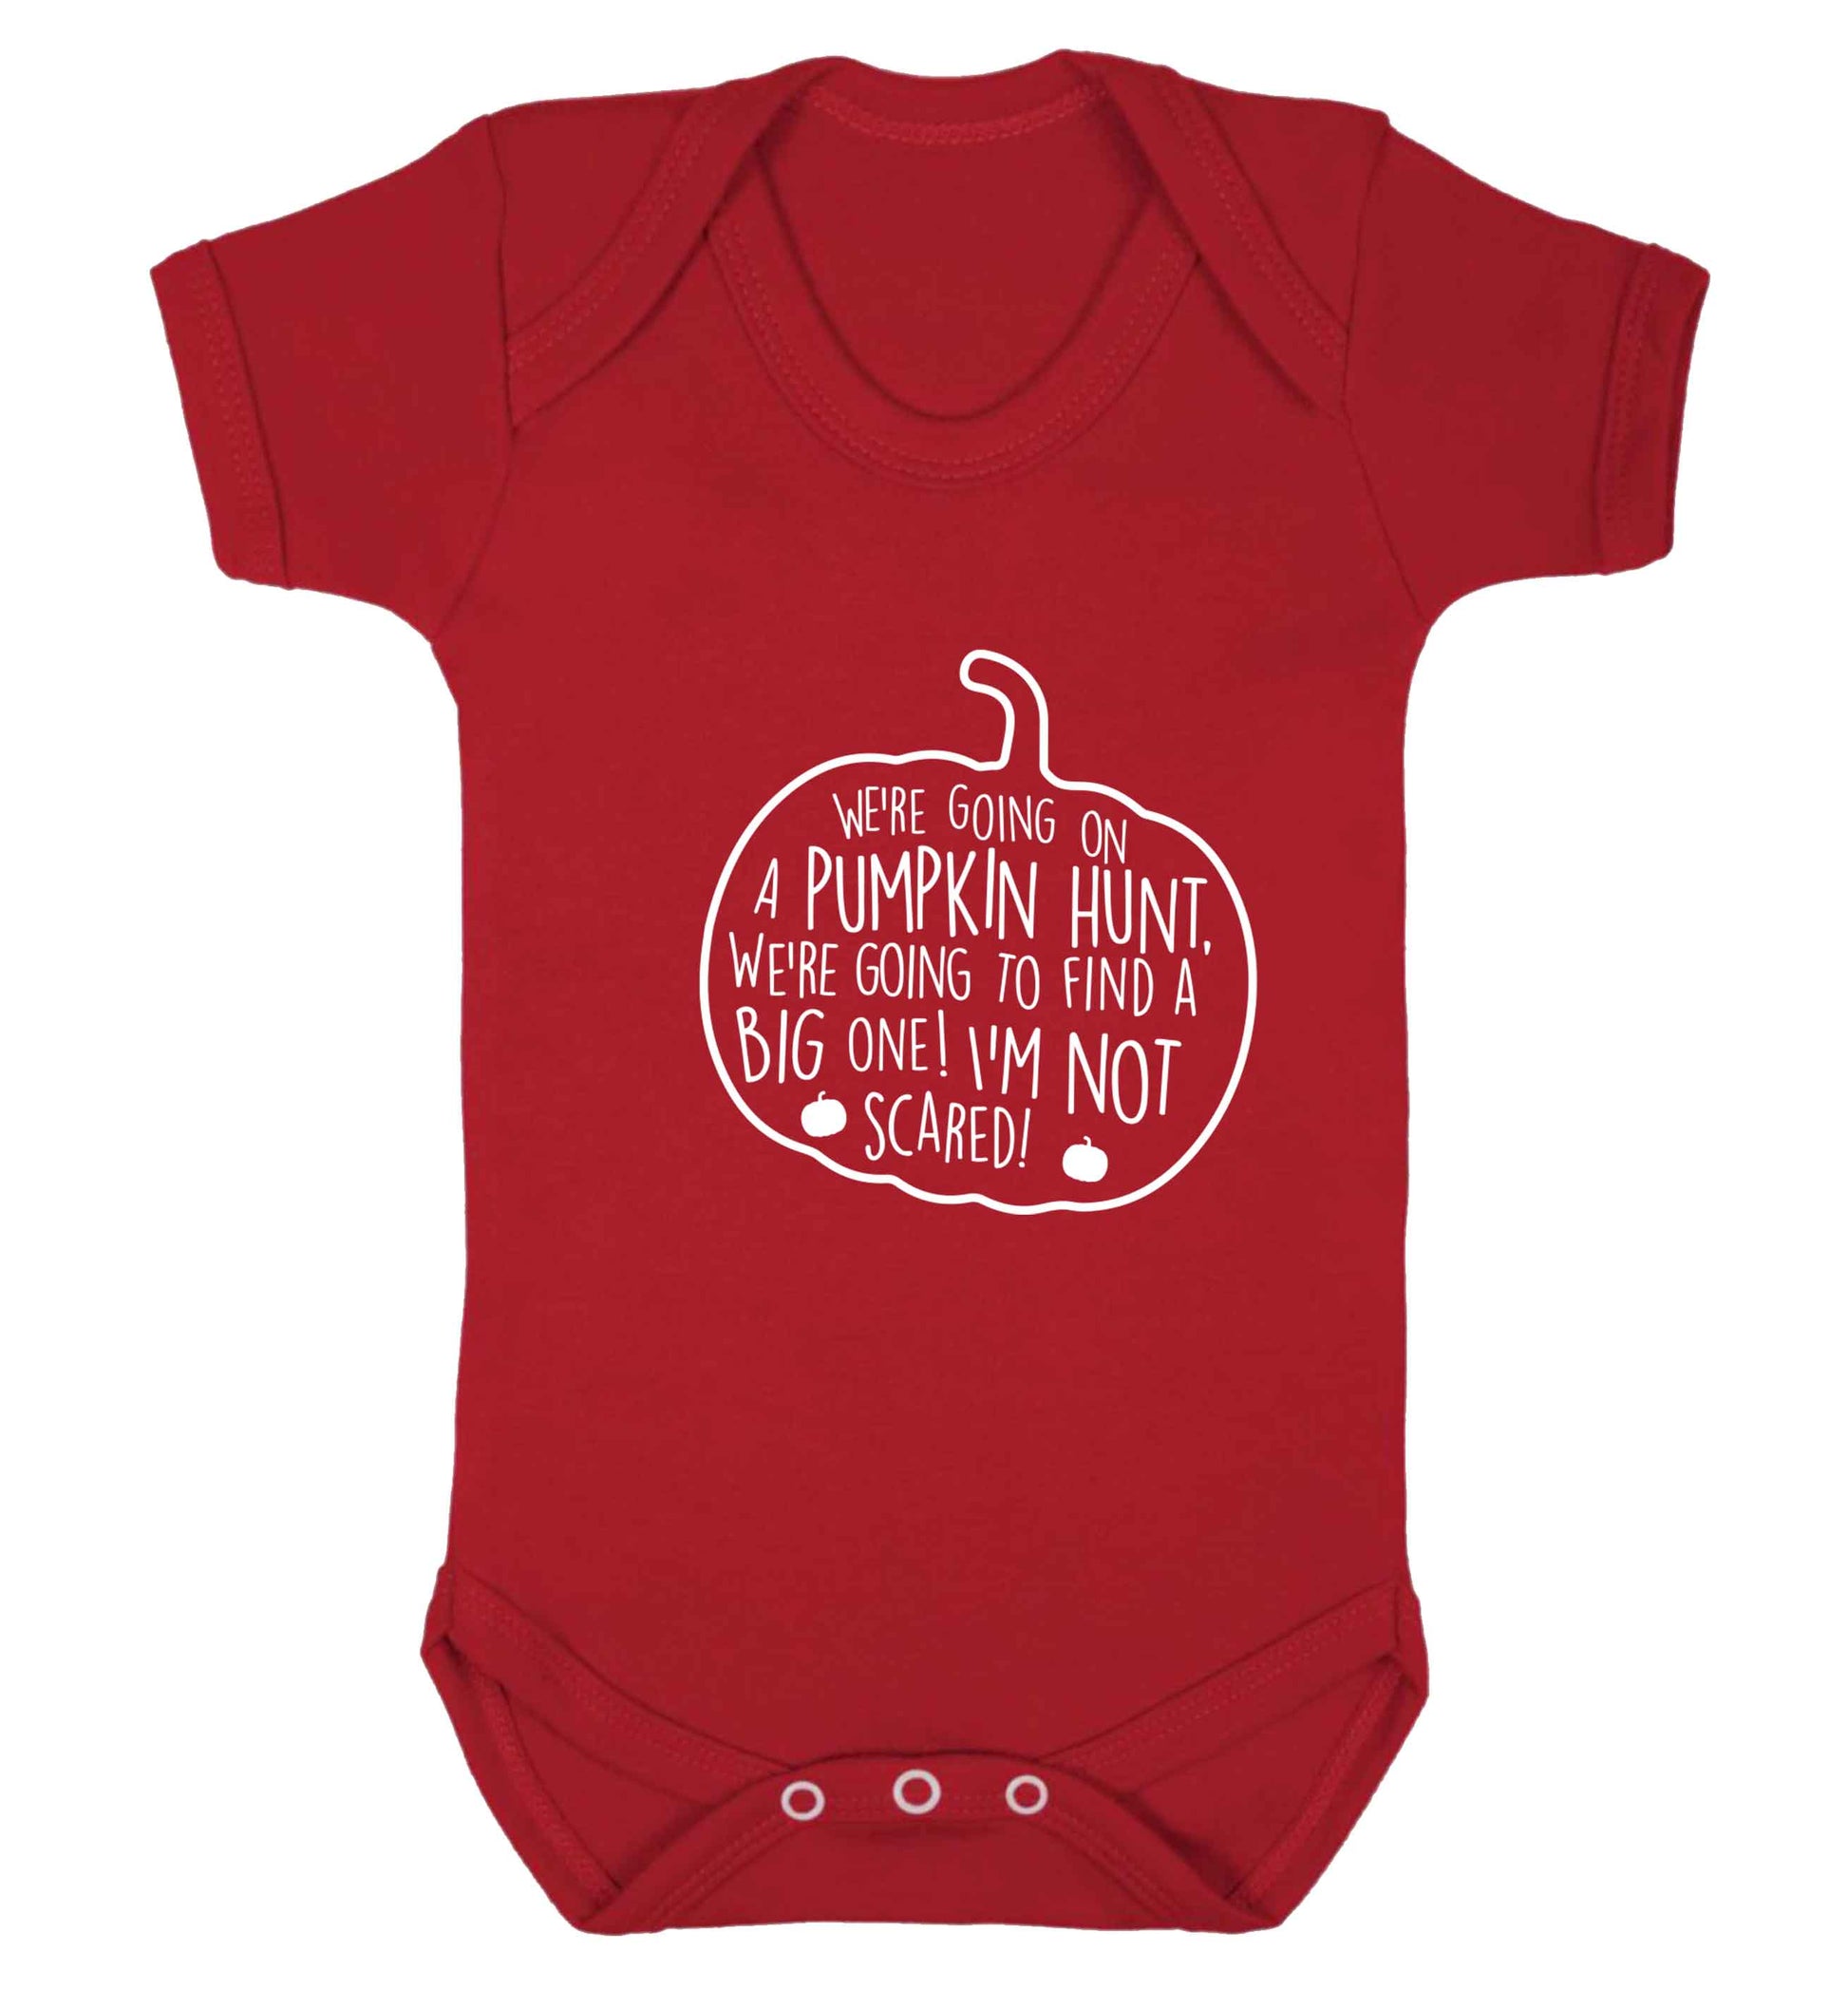 We're going on a pumpkin hunt baby vest red 18-24 months